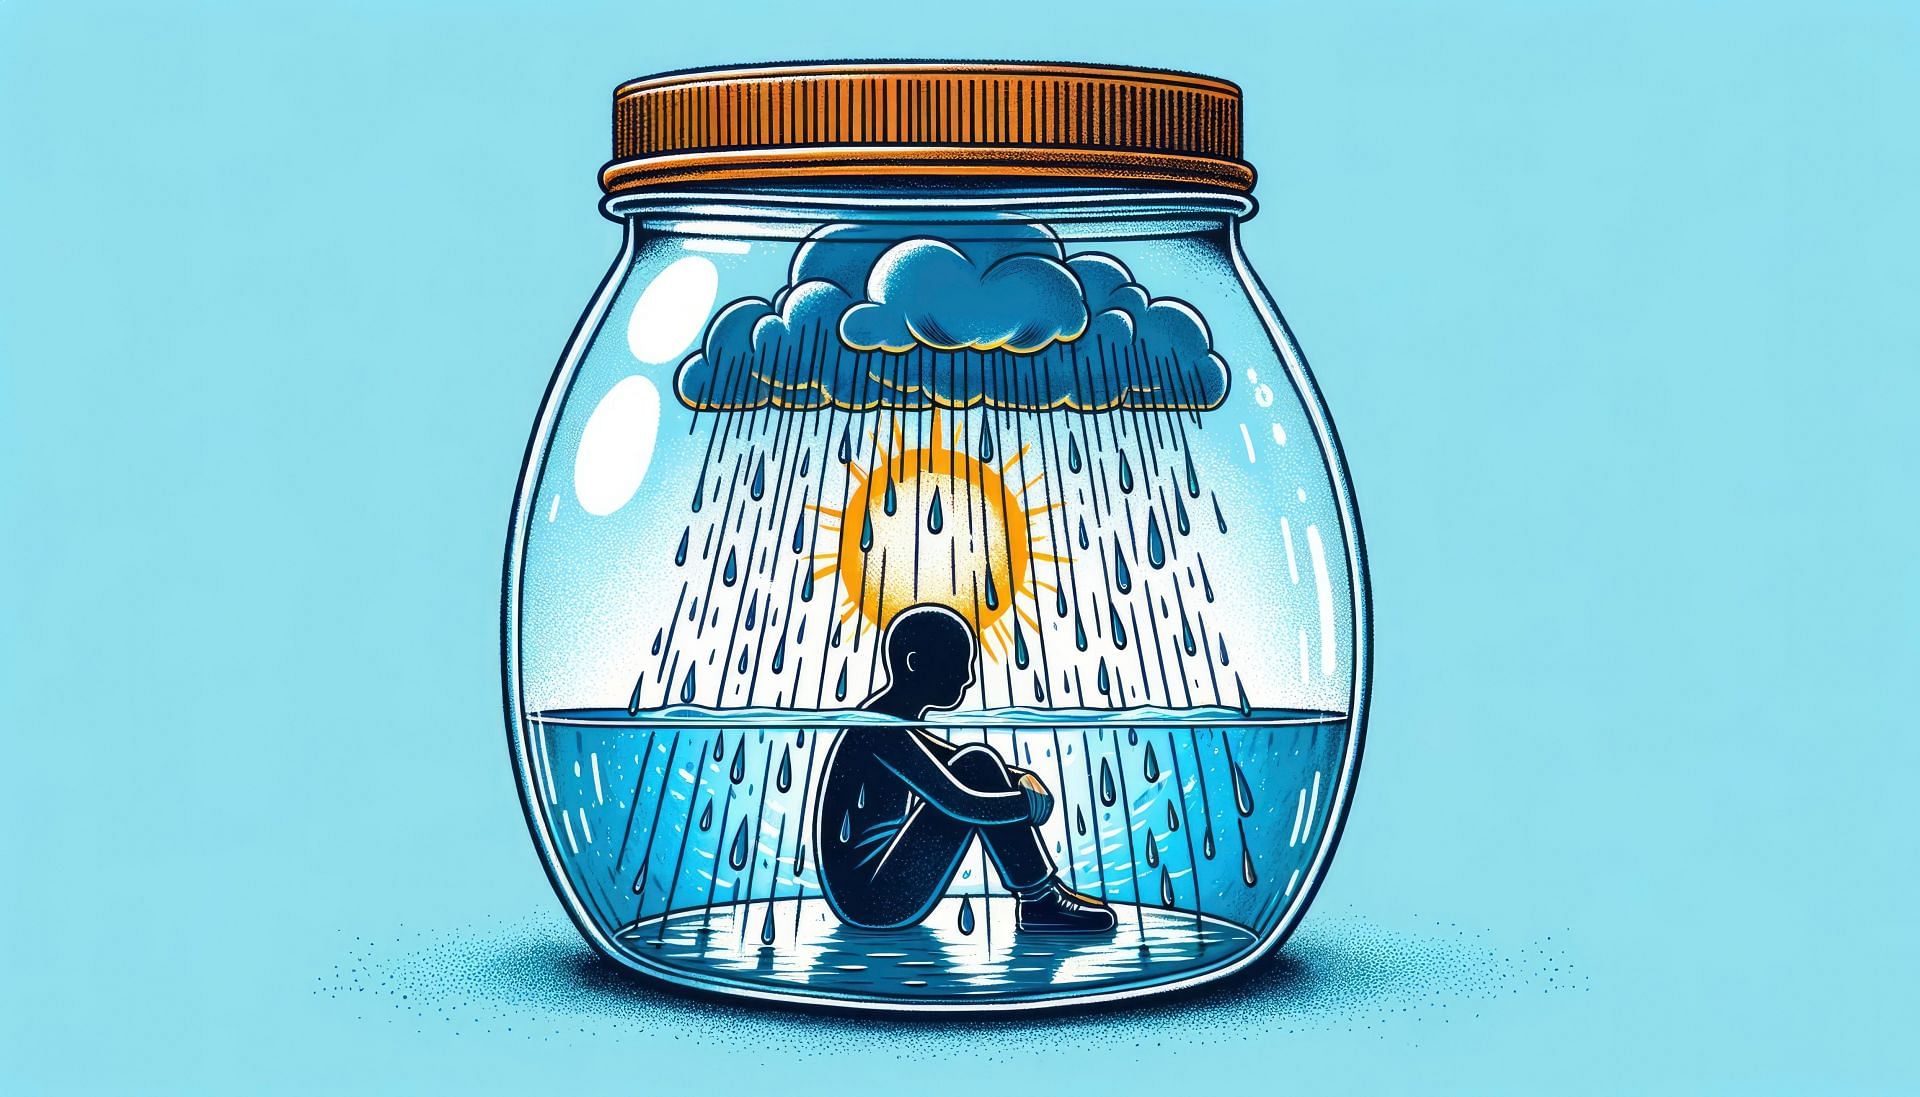 Sometimes our thoughts can become our prison. (Image via Vecteezy/ Ahasanara Akter)